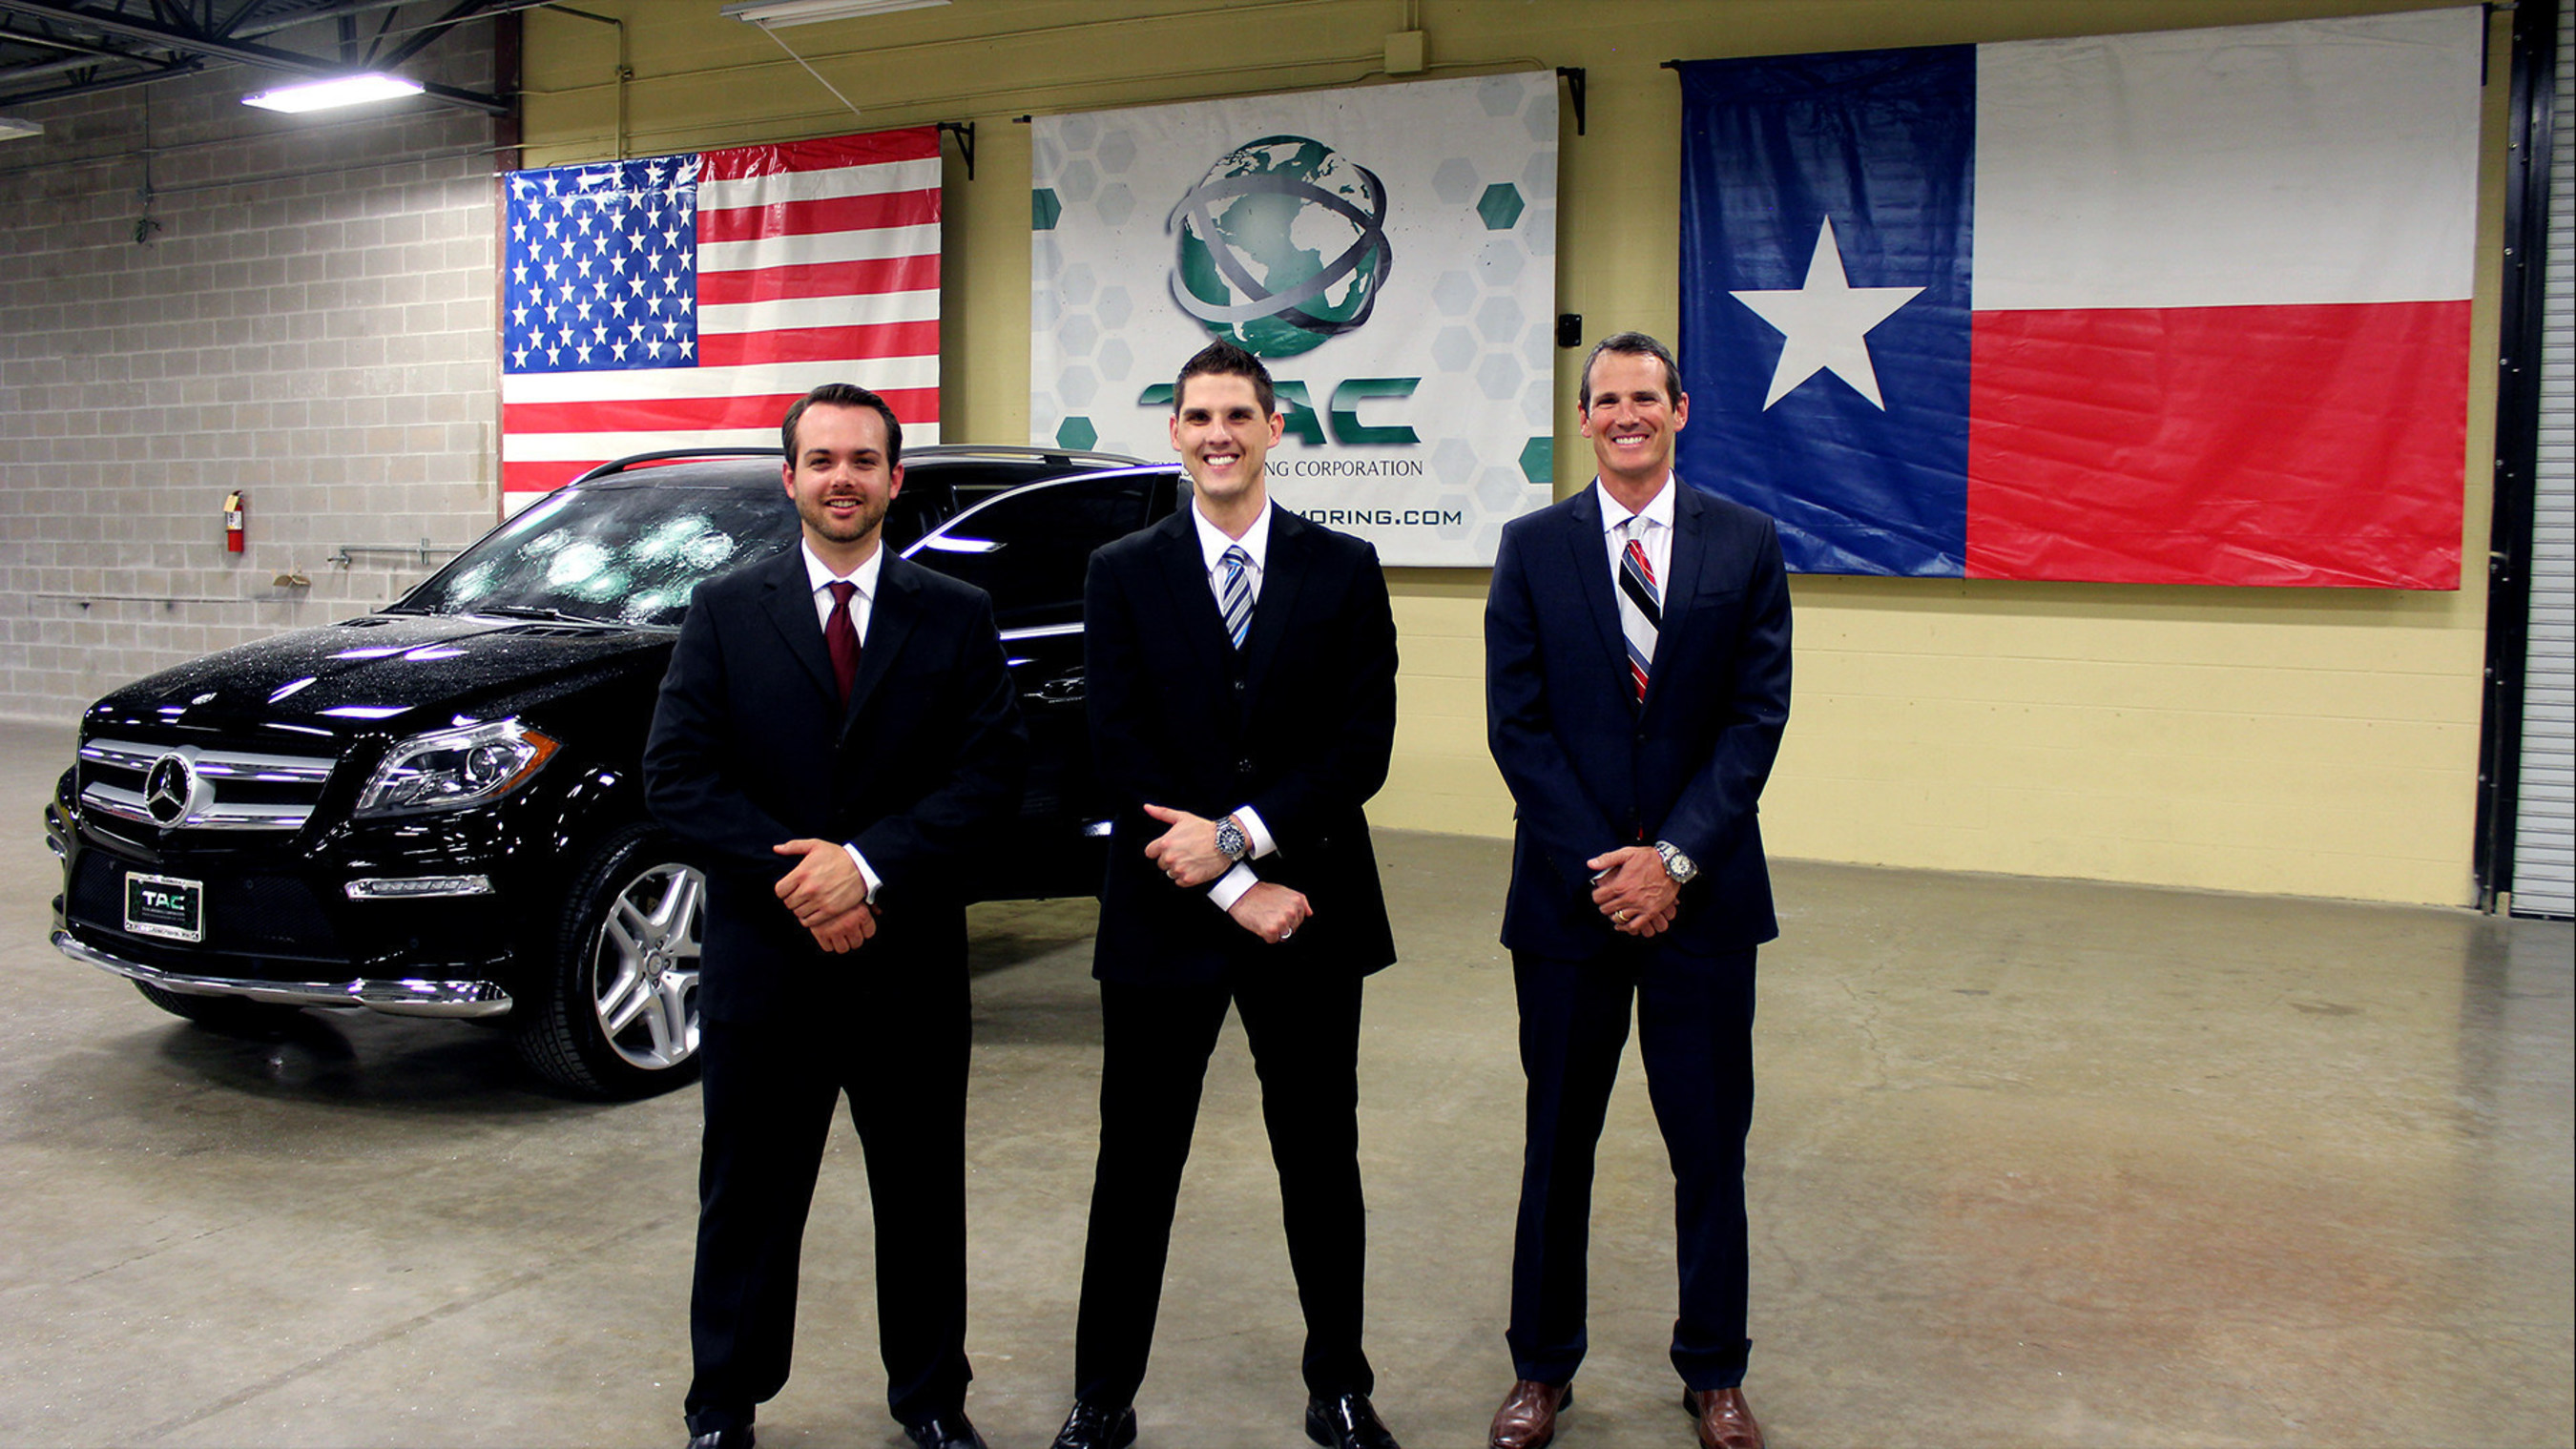 Texas Armoring staff after successful extreme product test. Left to Right, Lawrence Kosub (Sales Manager), Jason Forston (EVP/COO), and Trent Kimball (President/CEO)